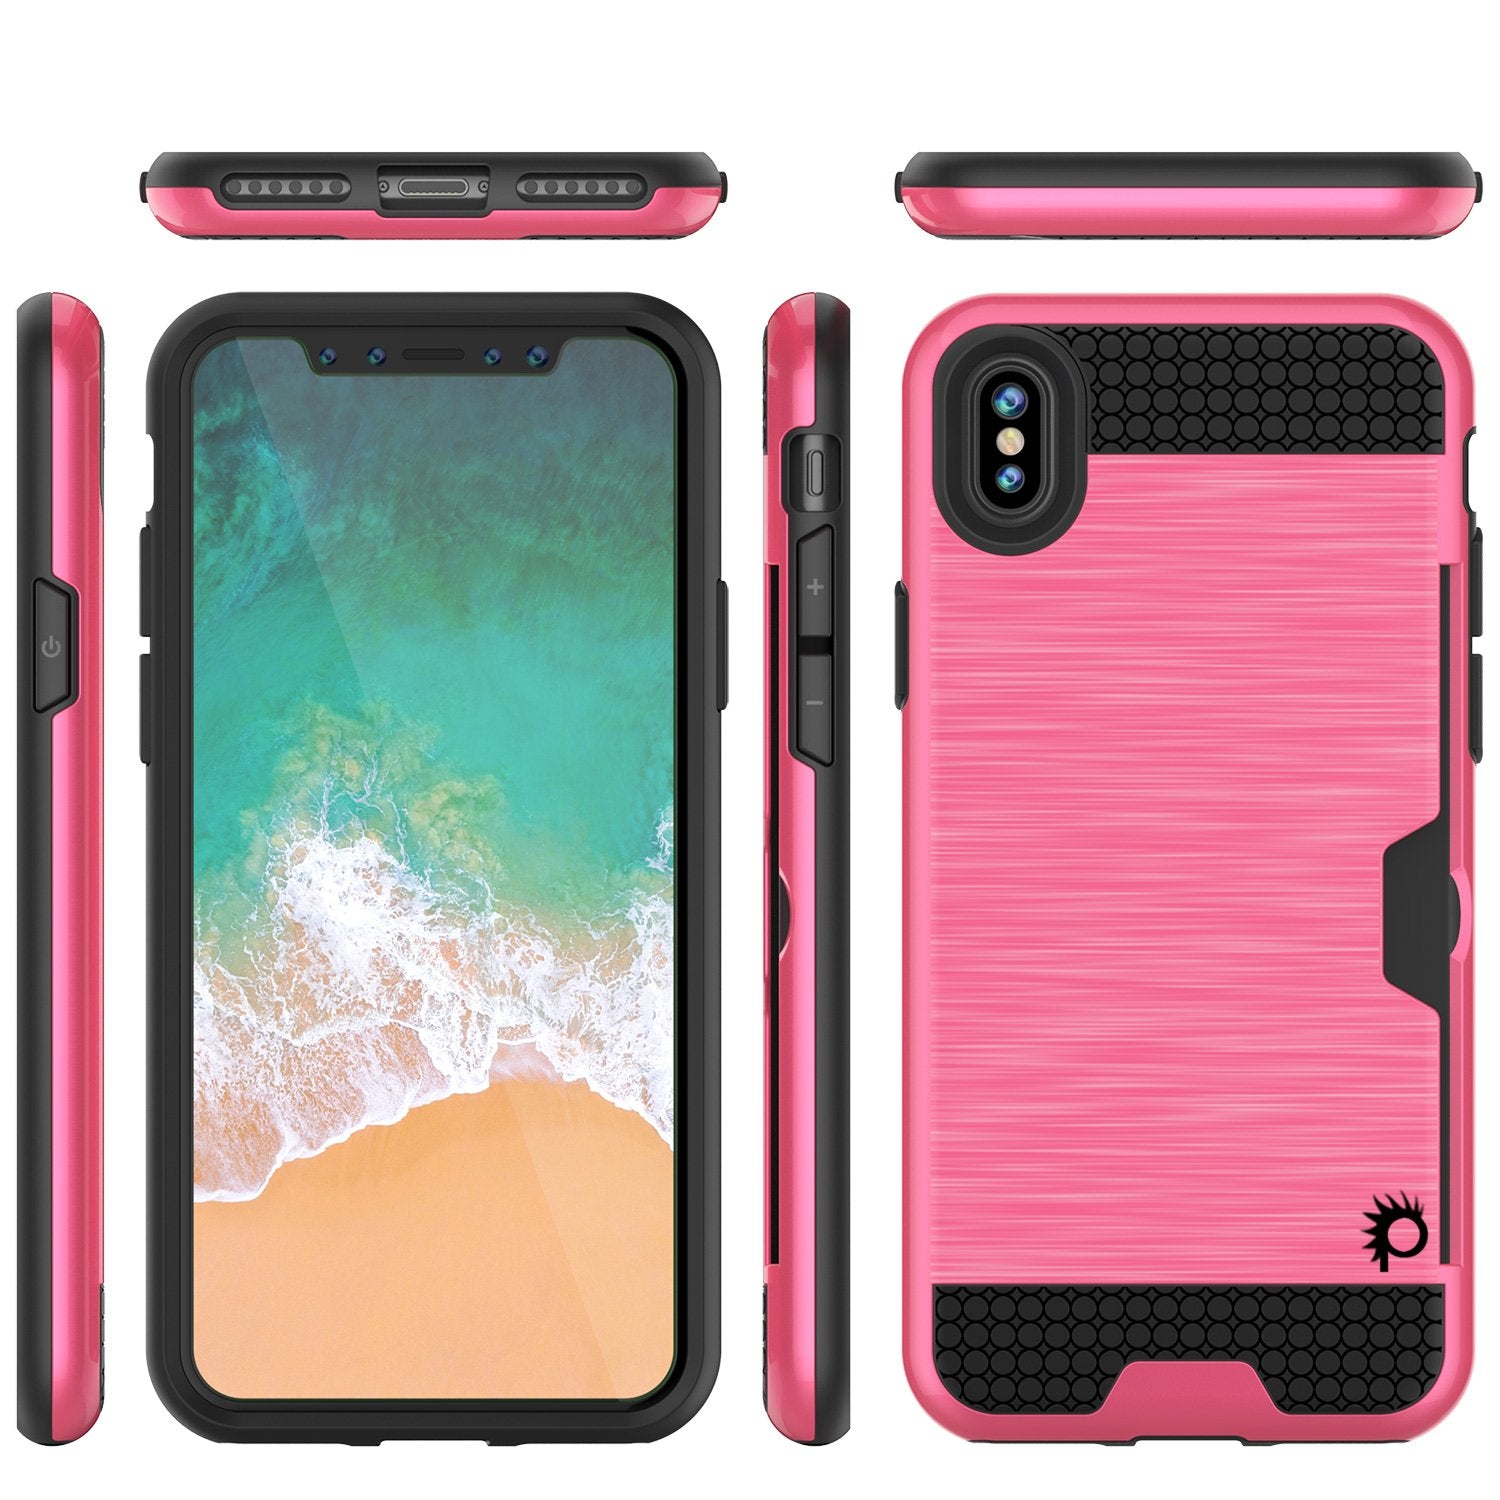 iPhone X Case, Punkcase [SLOT Series] Slim Fit Dual-Layer Cover [Pink]